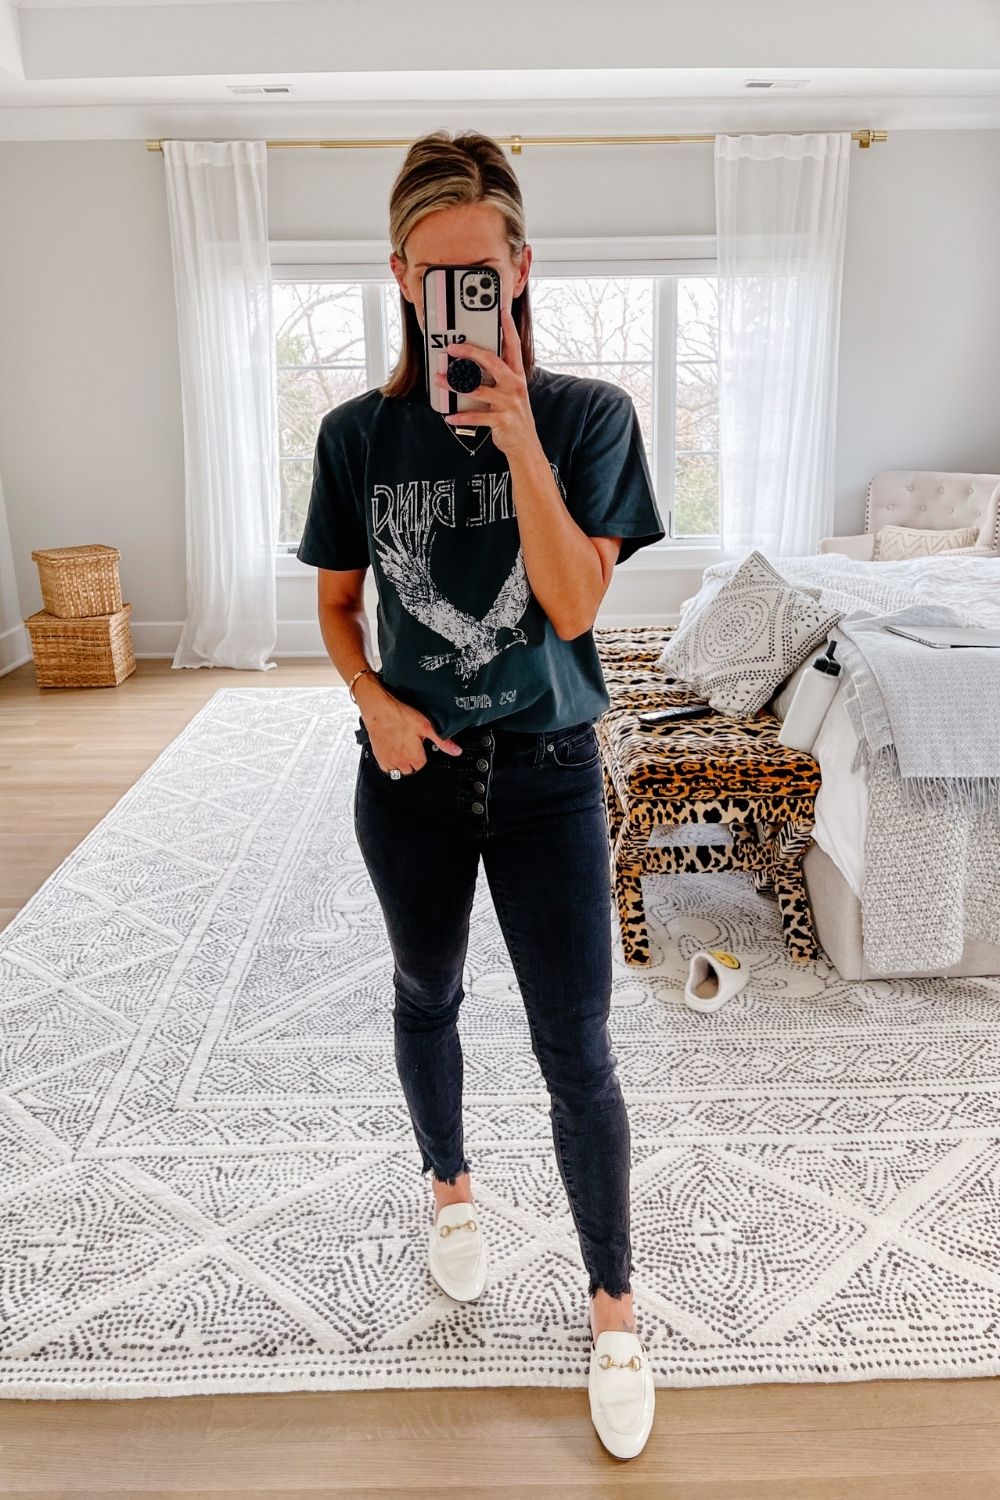 Suzanne wearing a black graphic tee, black denim, and mules